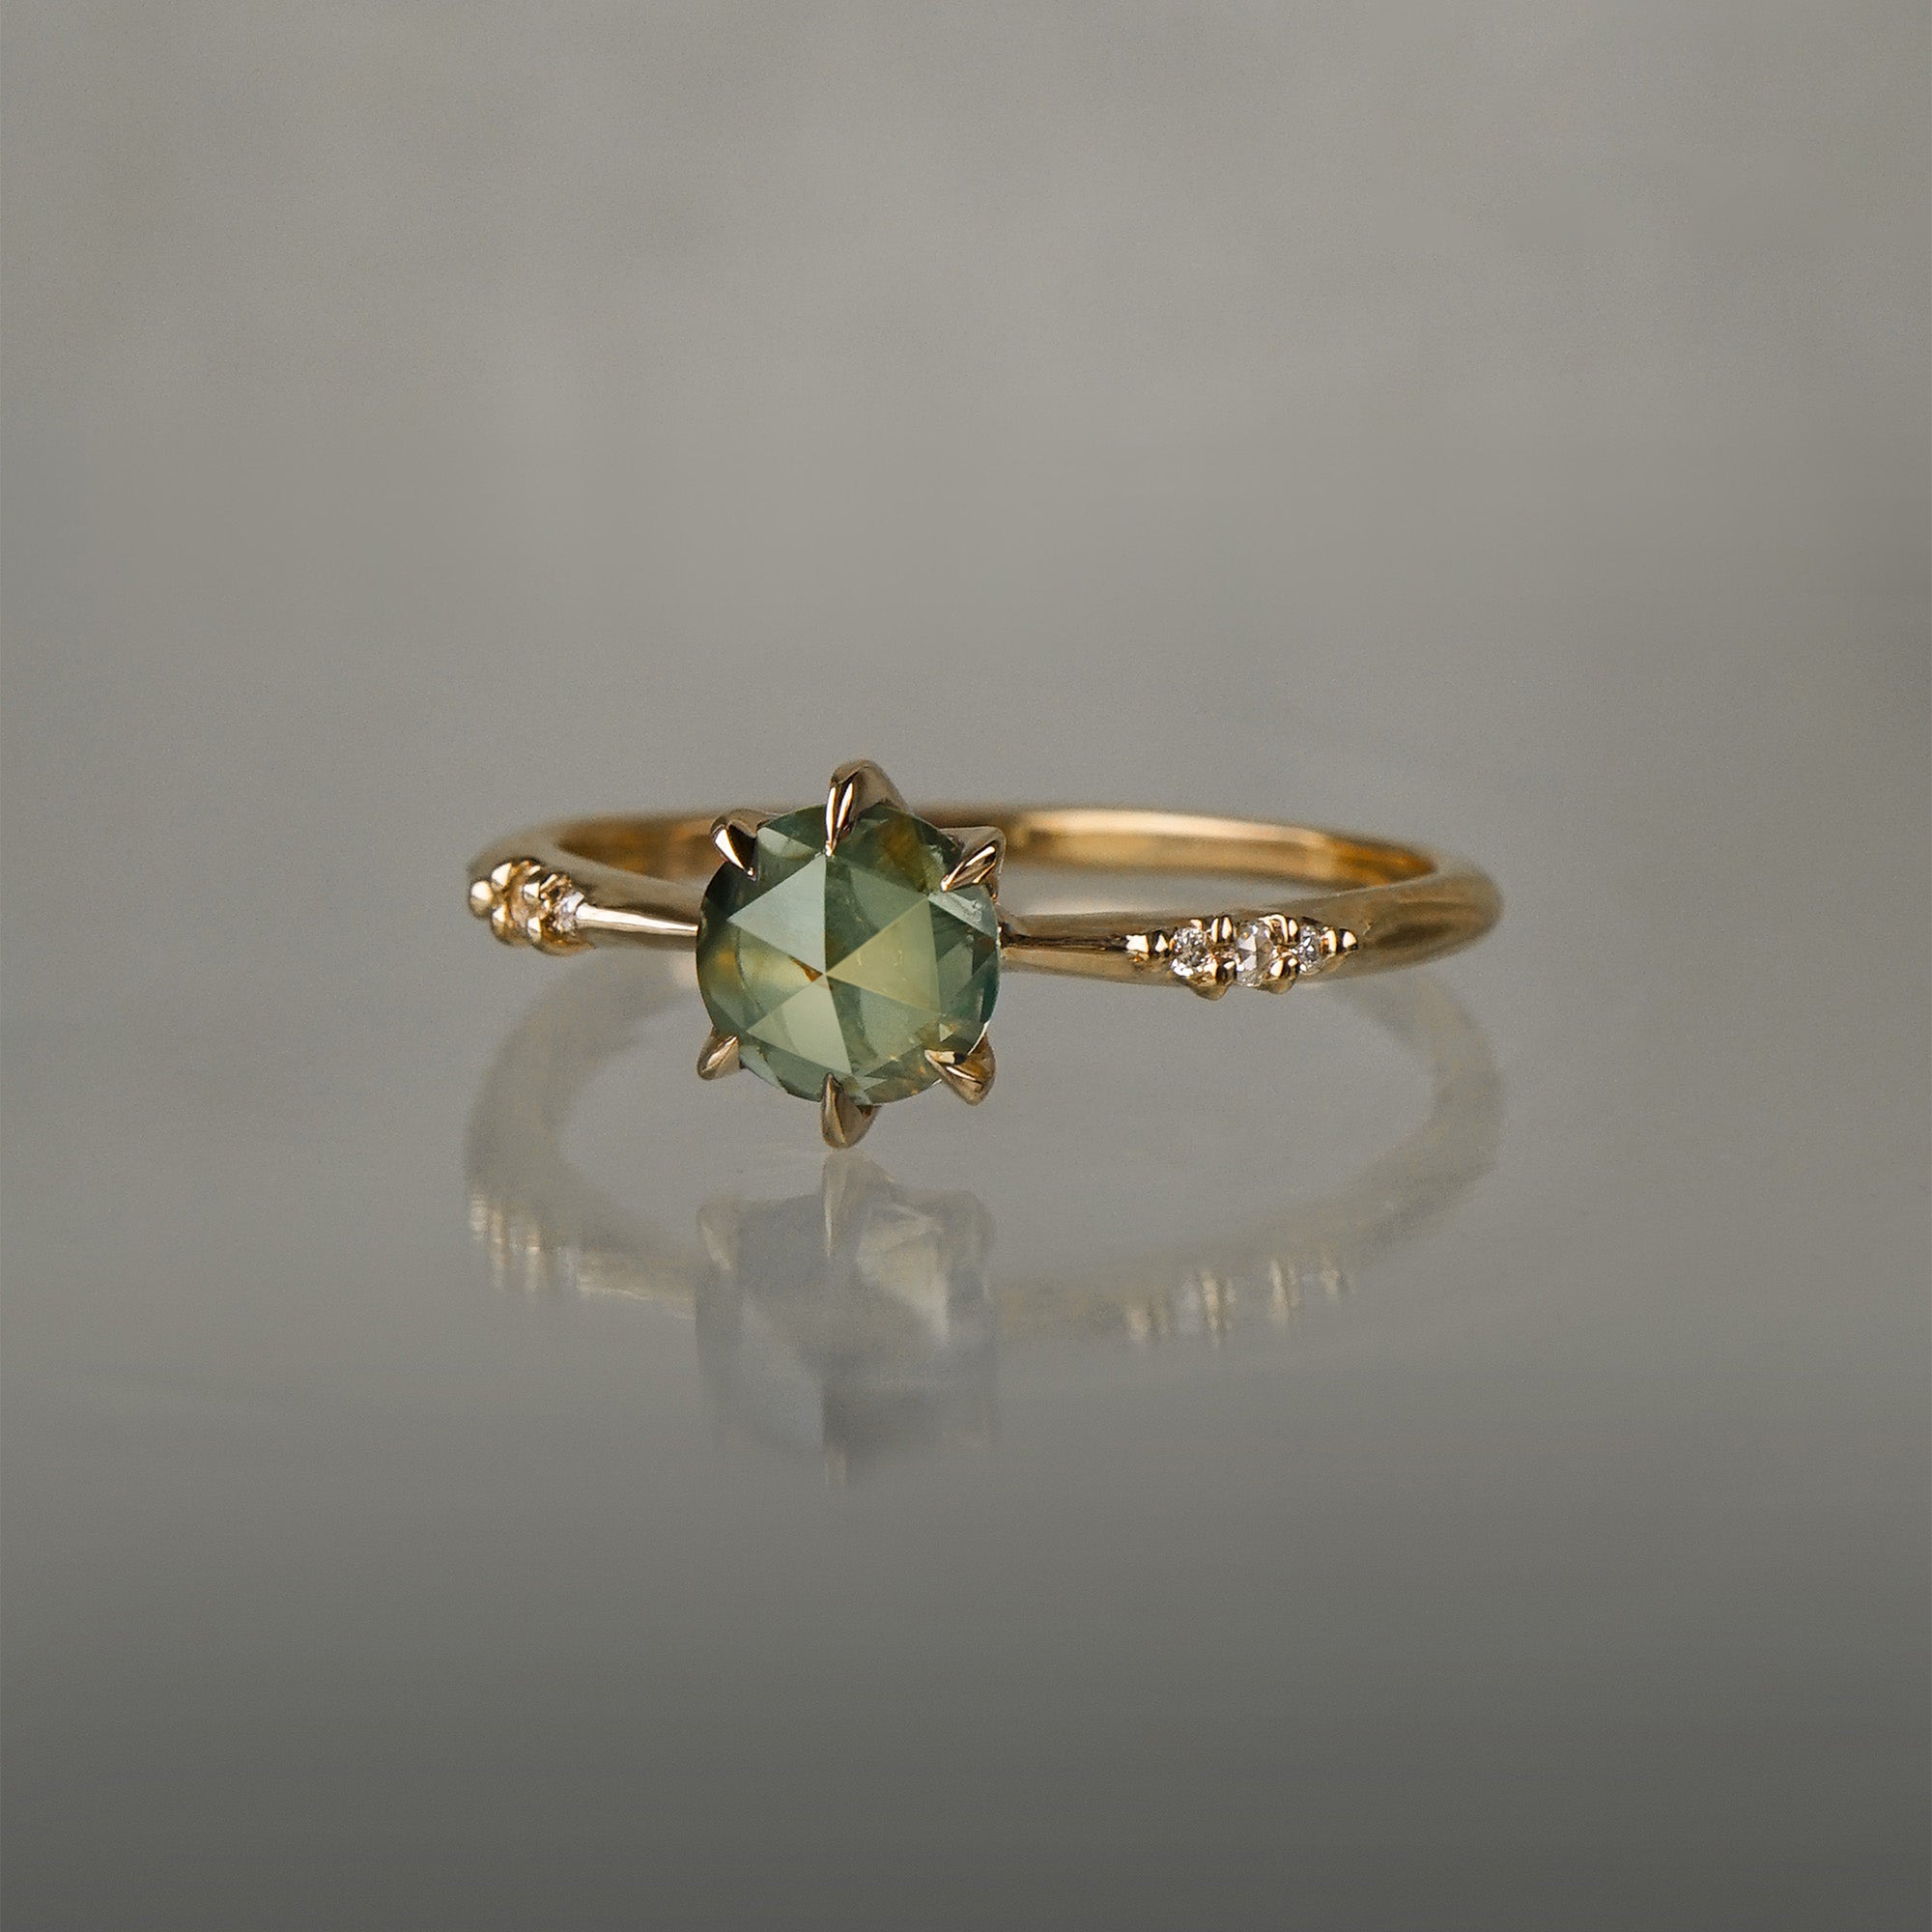 Dainty yellow gold Ilona style engagement ring by Laurie Fleming Jewellery on a grey background, with a rose cut green sapphire and diamonds on the band.